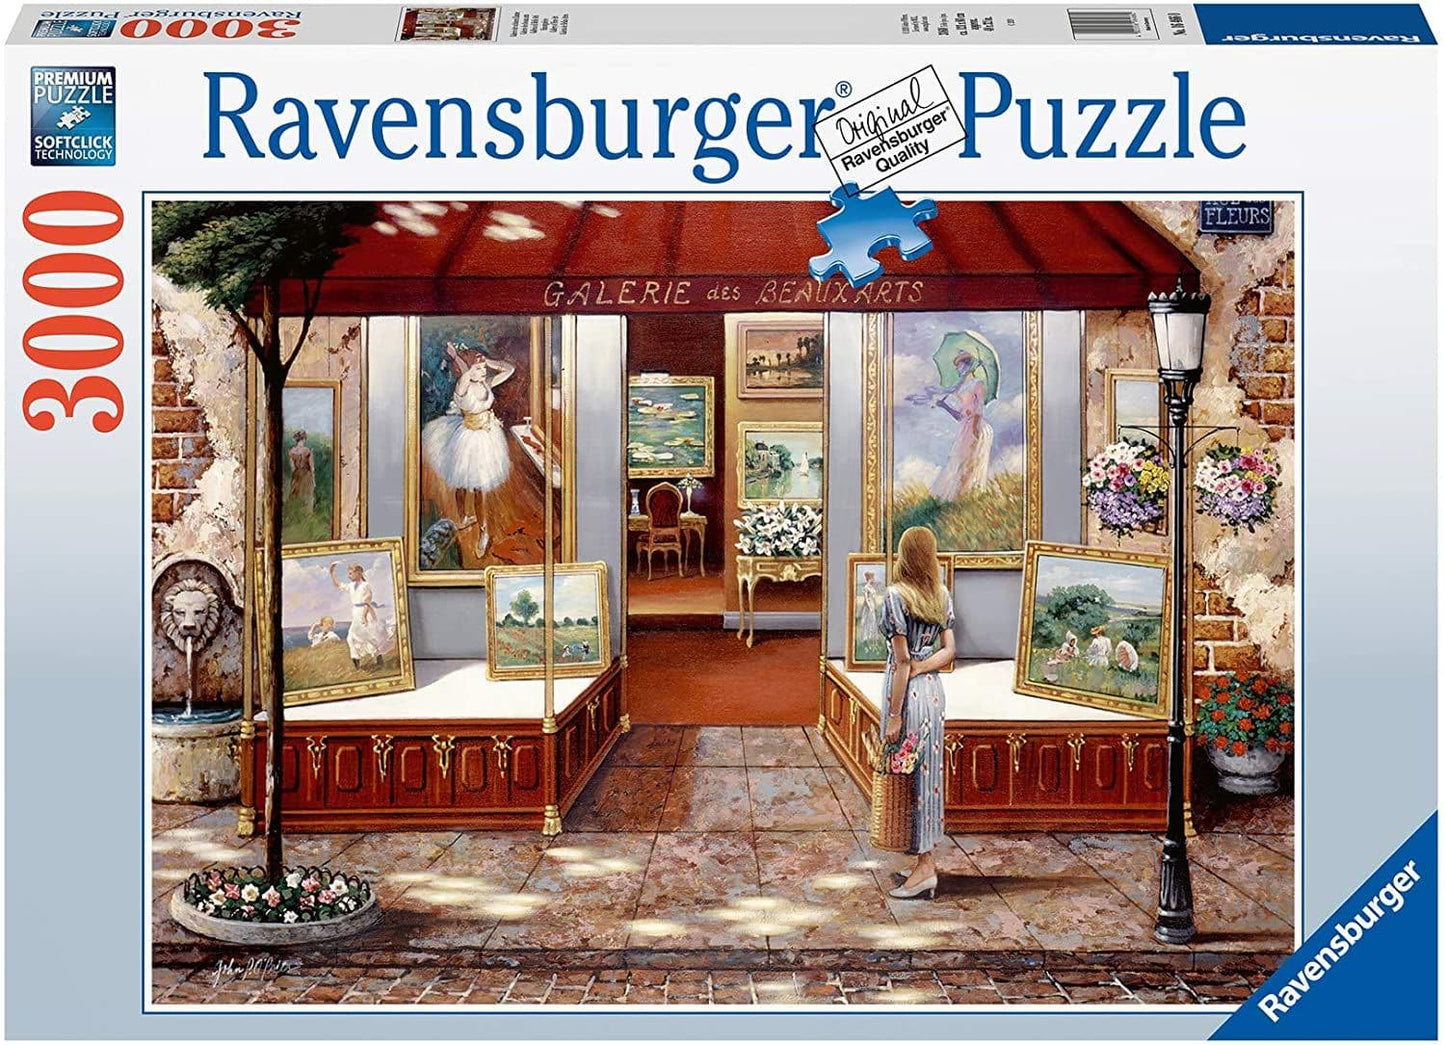 Ravensburger - Gallery of Fine Art - 3000 Piece Jigsaw Puzzle